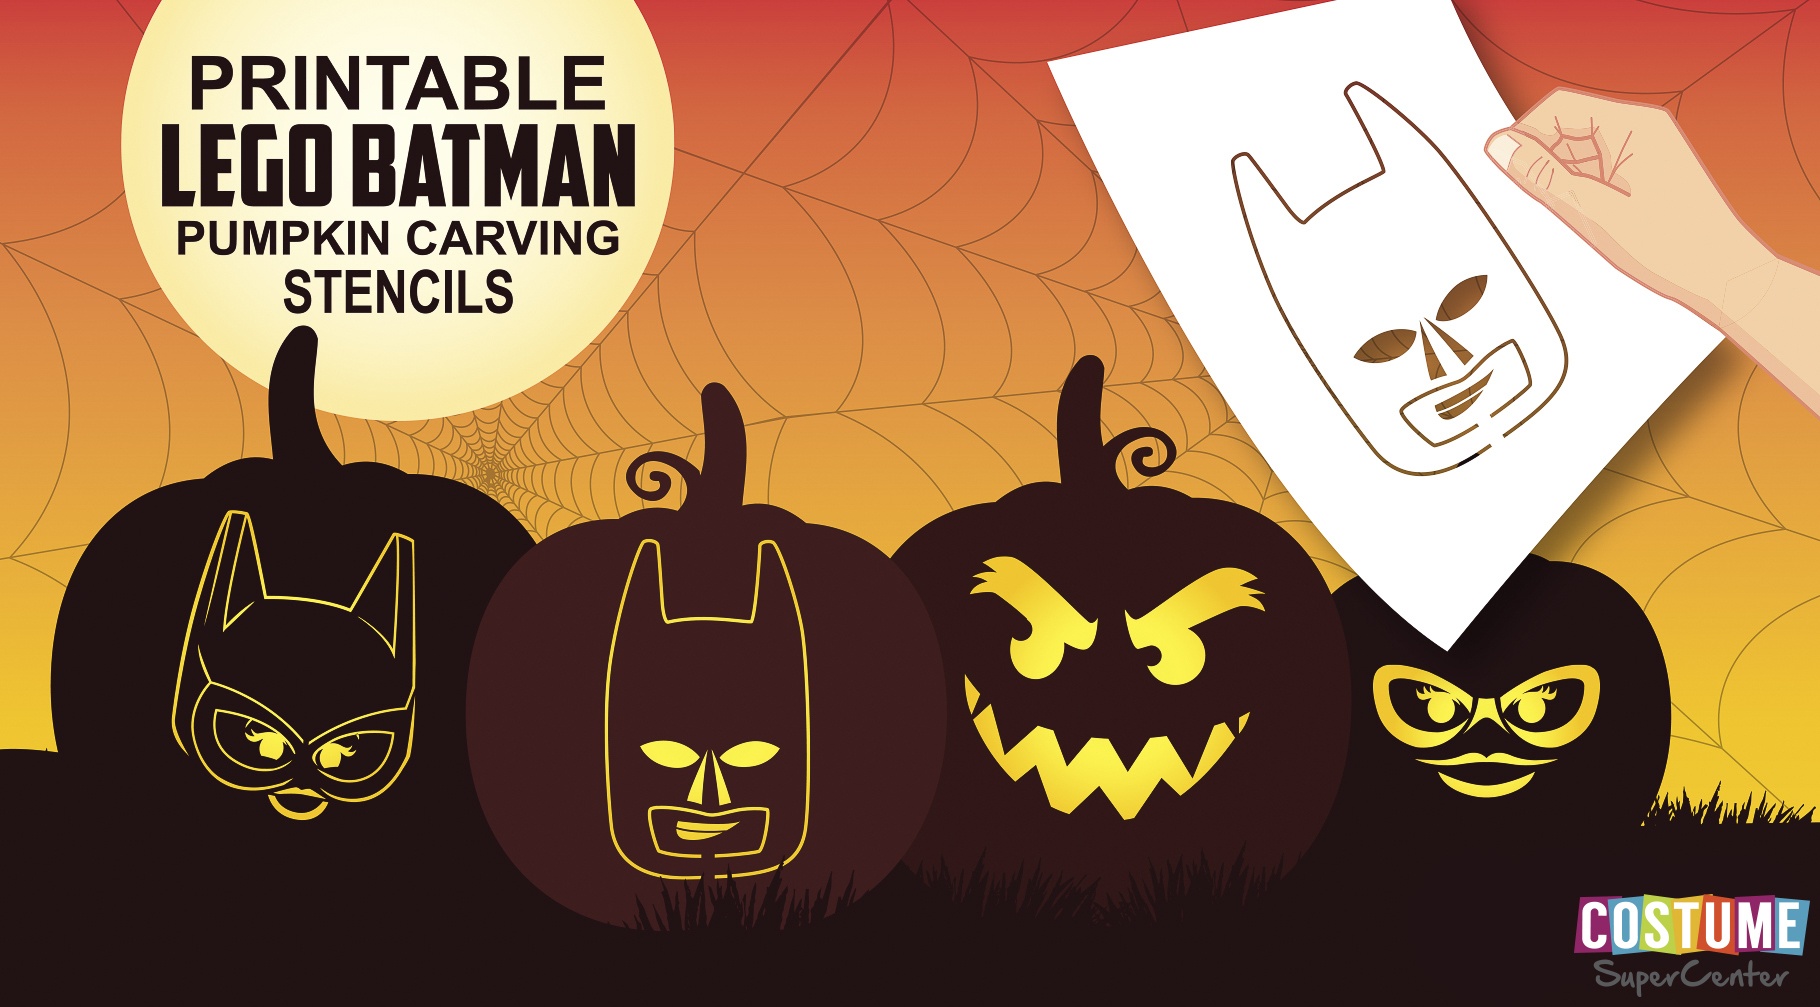 Fun And Free Printable Themed Pumpkin Carving Stencils — All For The - Superhero Pumpkin Stencils Free Printable